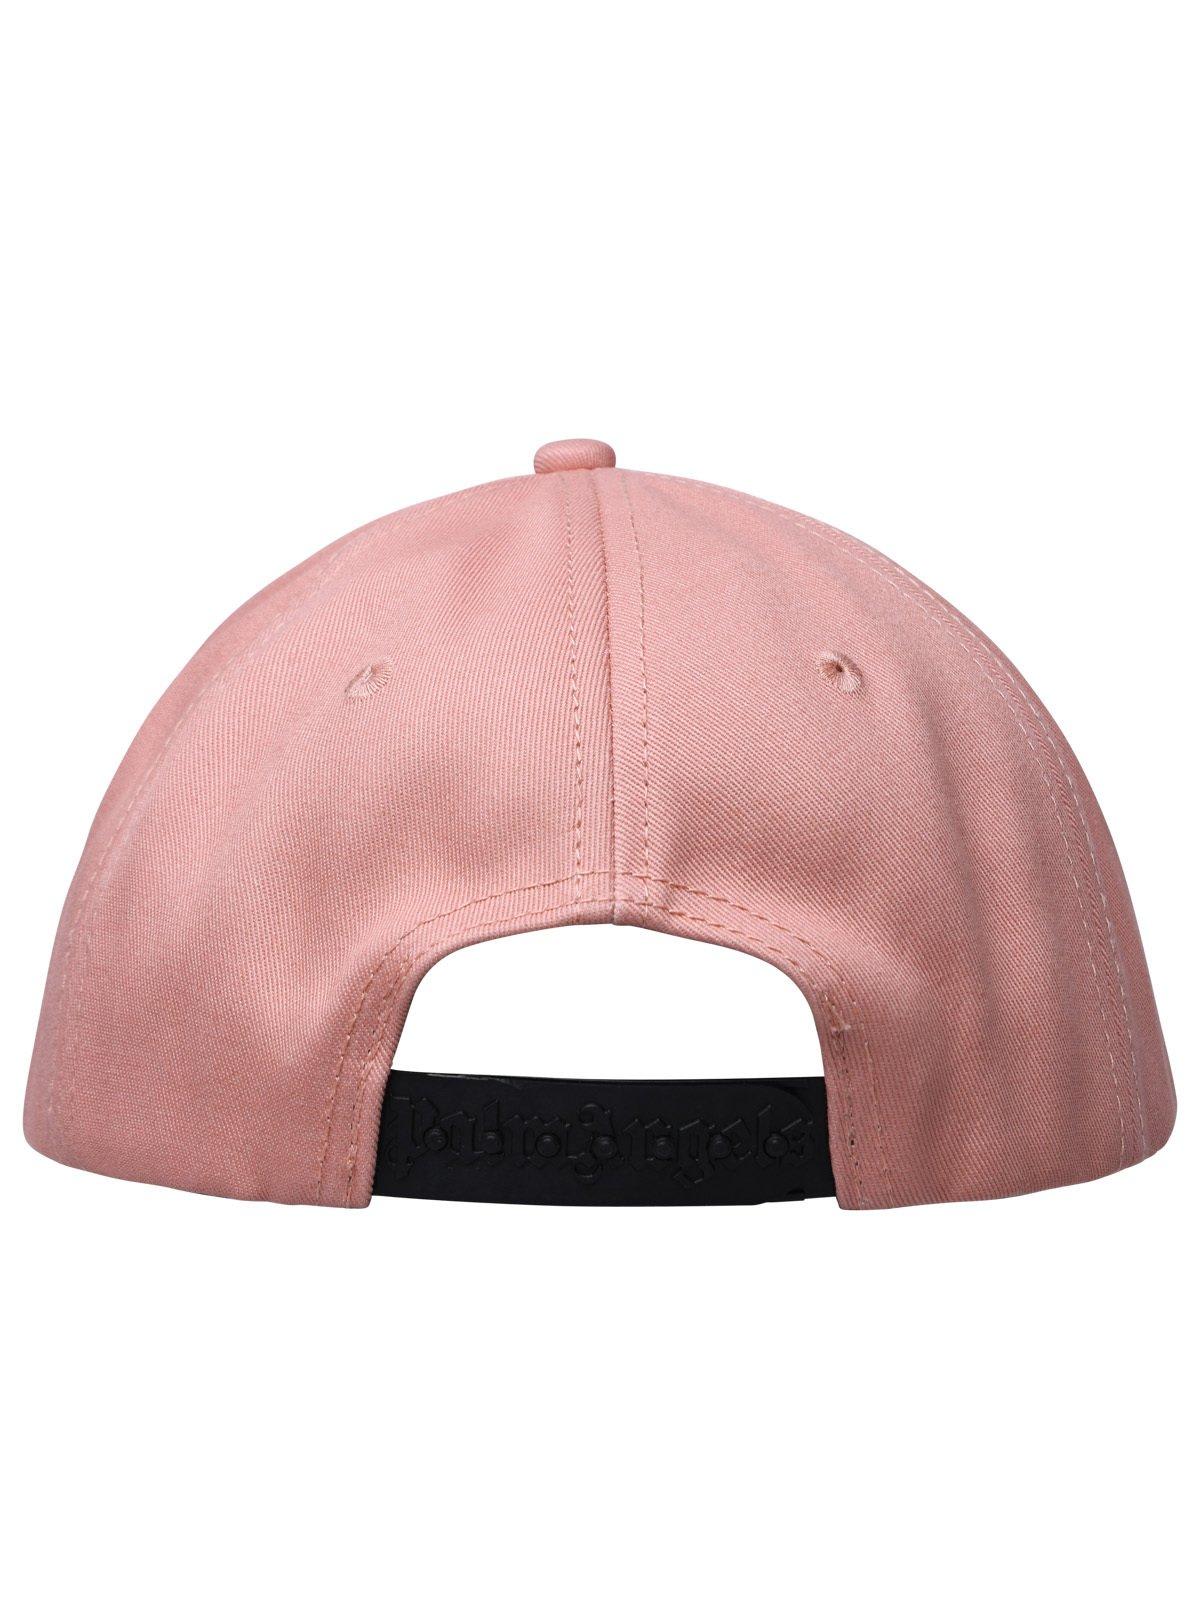 Shop Palm Angels Logo Embroidered Baseball Cap In Pink